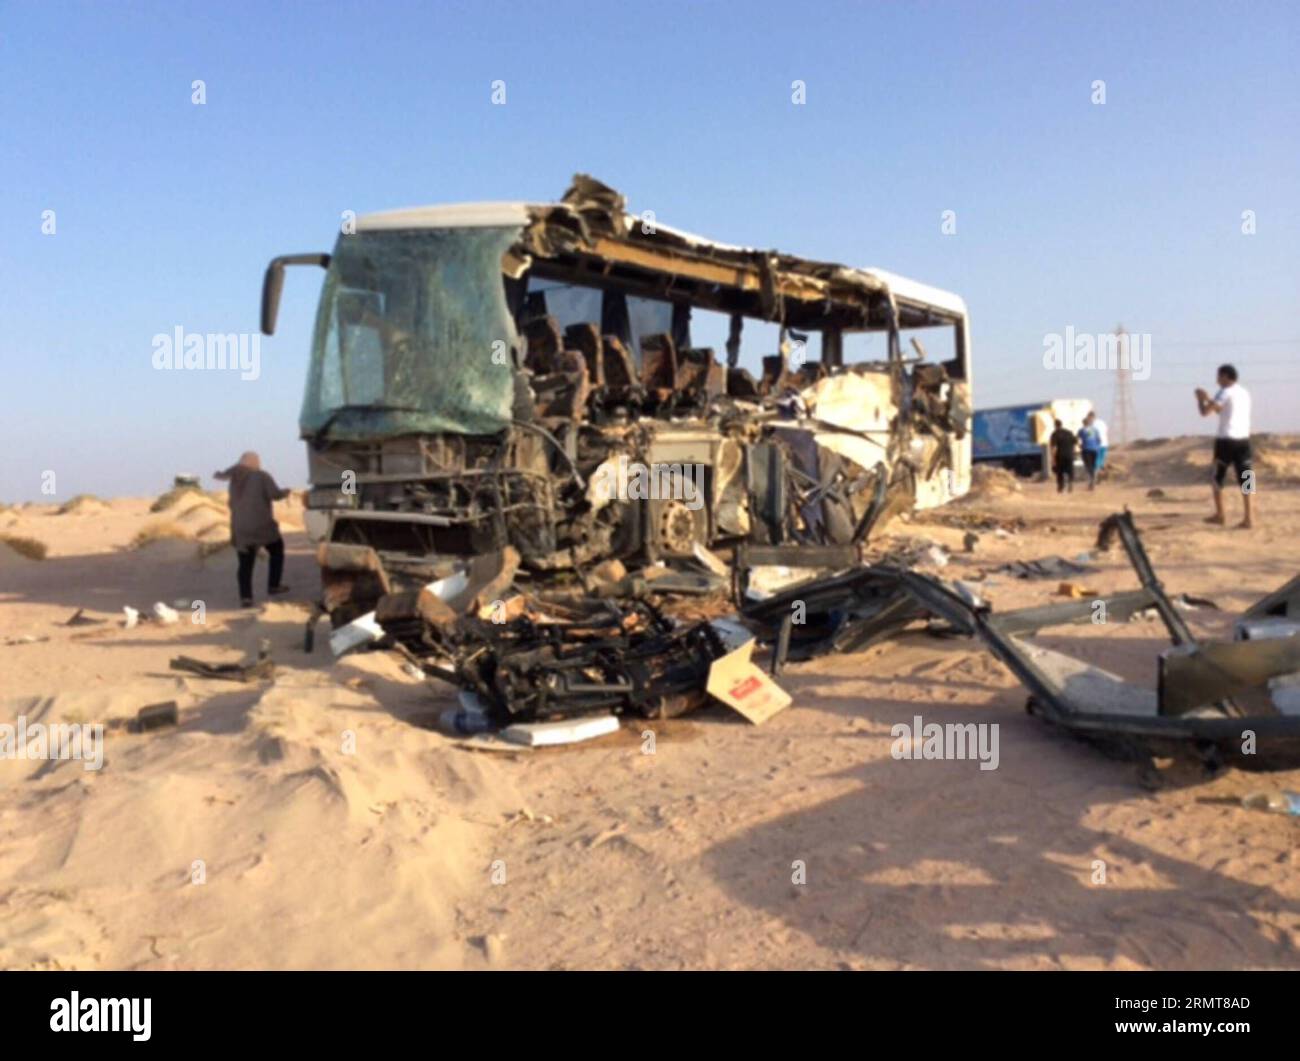 (140822) -- CAIRO, Aug. 22, 2014 -- People gather at the site of a bus crash in Egypt s South Sinai province, Aug. 22, 2014. At least 33 people were killed and over 40 others seriously wounded in the early hours of Friday as two buses collided on a highway some 50 km away from Red Sea resort city Sharm El-Sheikh in Egypt s South Sinai province, a security source told Xinhua. ) EGYPT-CAIRO-SINA-ACCIDENT STR PUBLICATIONxNOTxINxCHN   Cairo Aug 22 2014 Celebrities gather AT The Site of a Bus Crash in Egypt S South Sinai Province Aug 22 2014 AT least 33 Celebrities Were KILLED and Over 40 Others SE Stock Photo